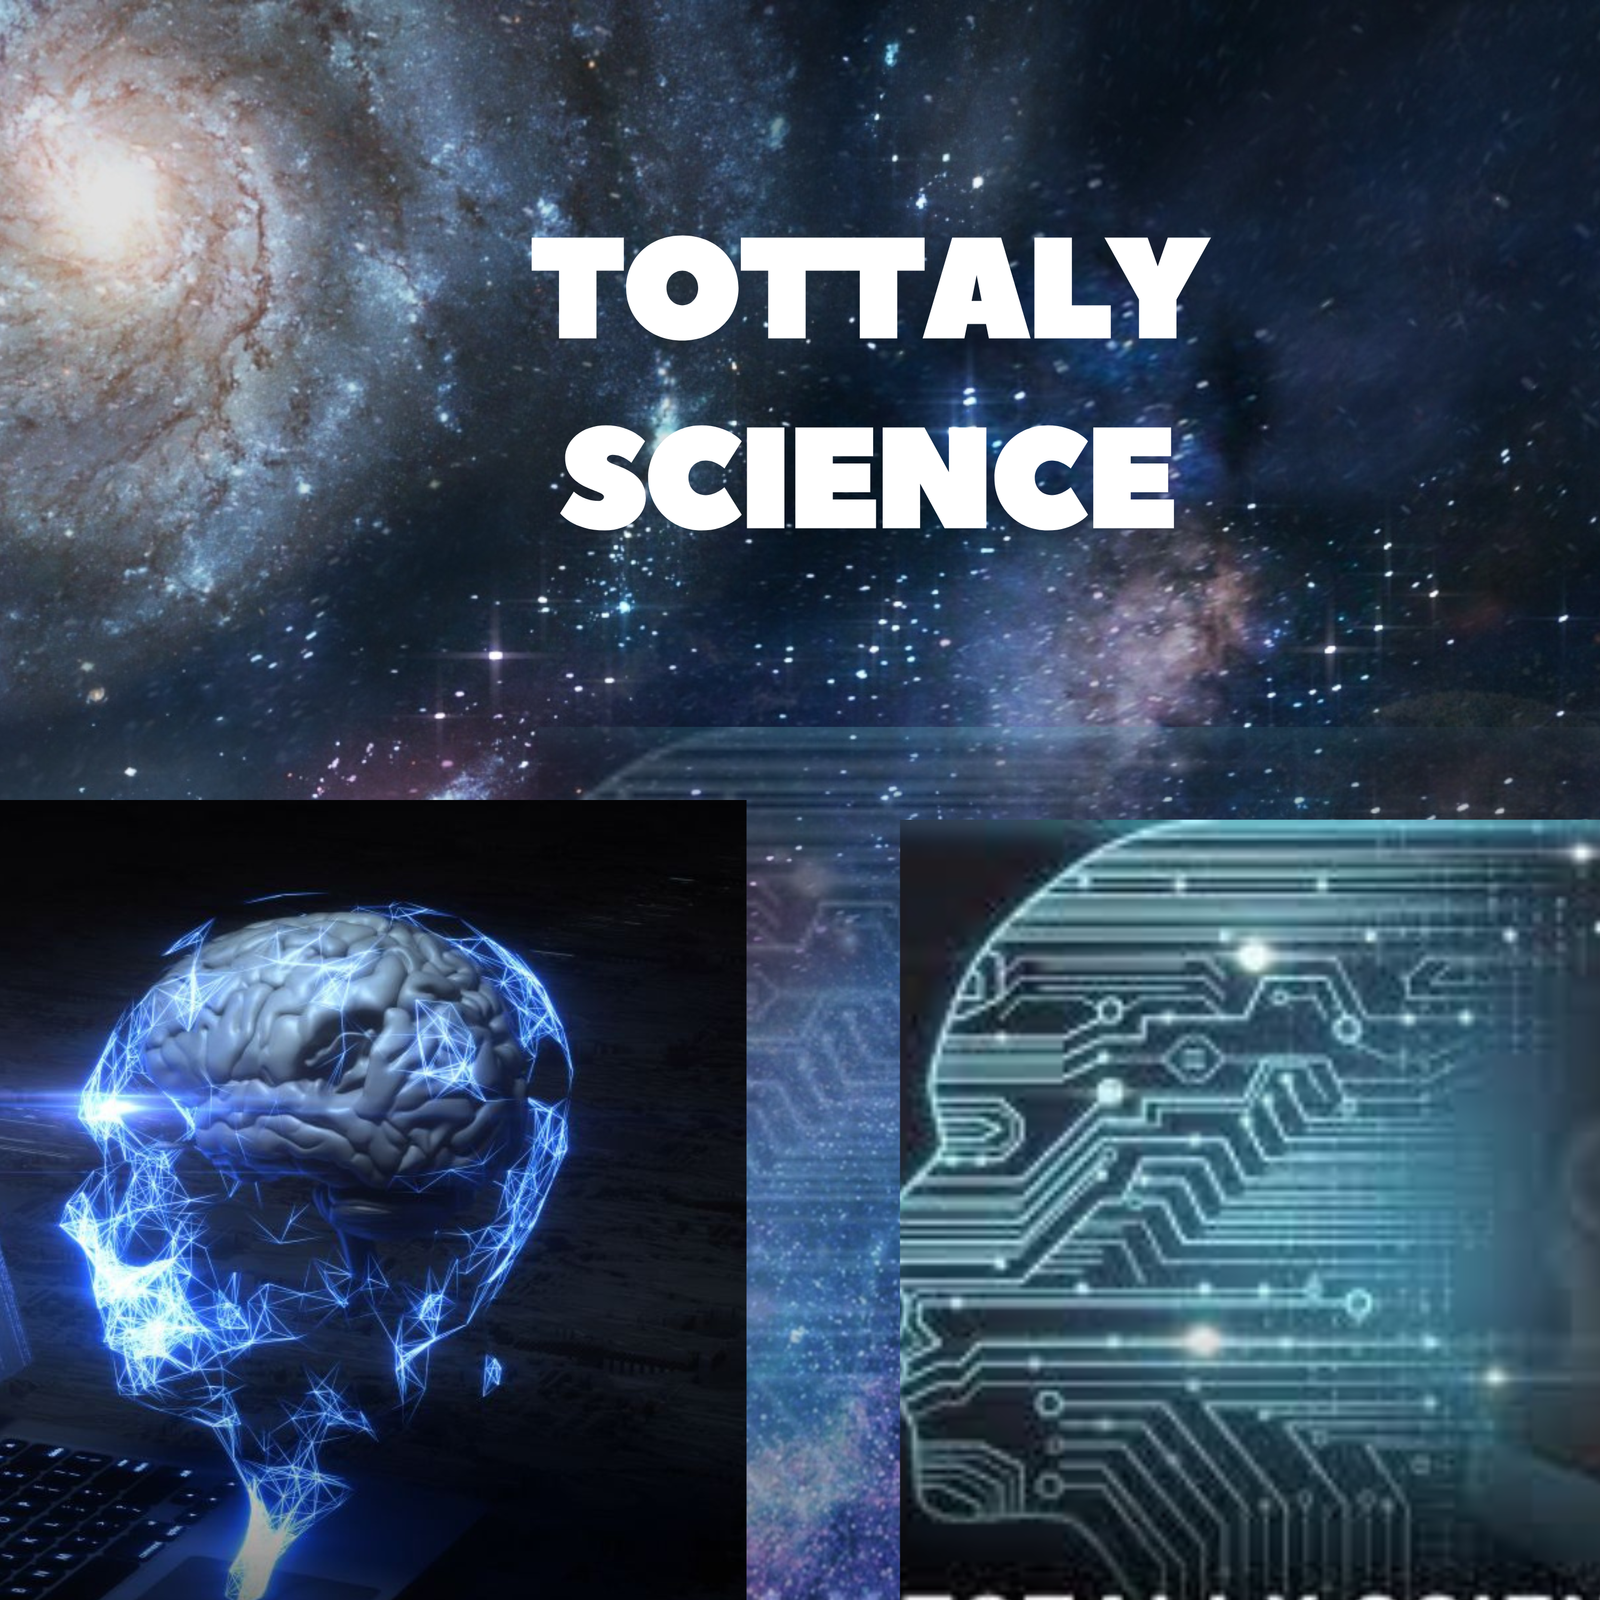 Totally Science